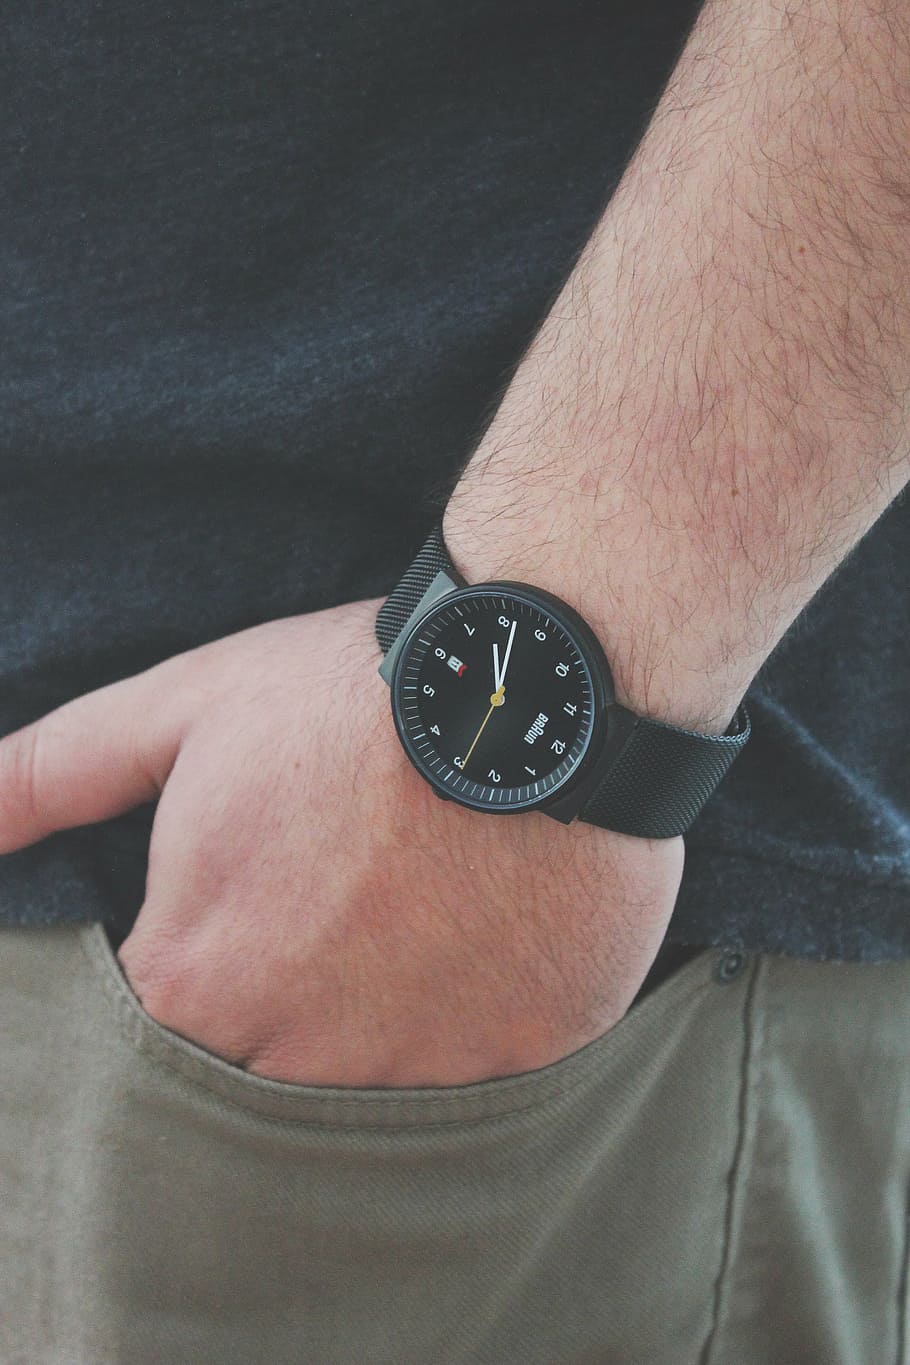 person, wearing, black, watch, round, analog, fashion, accessories, objects, guy